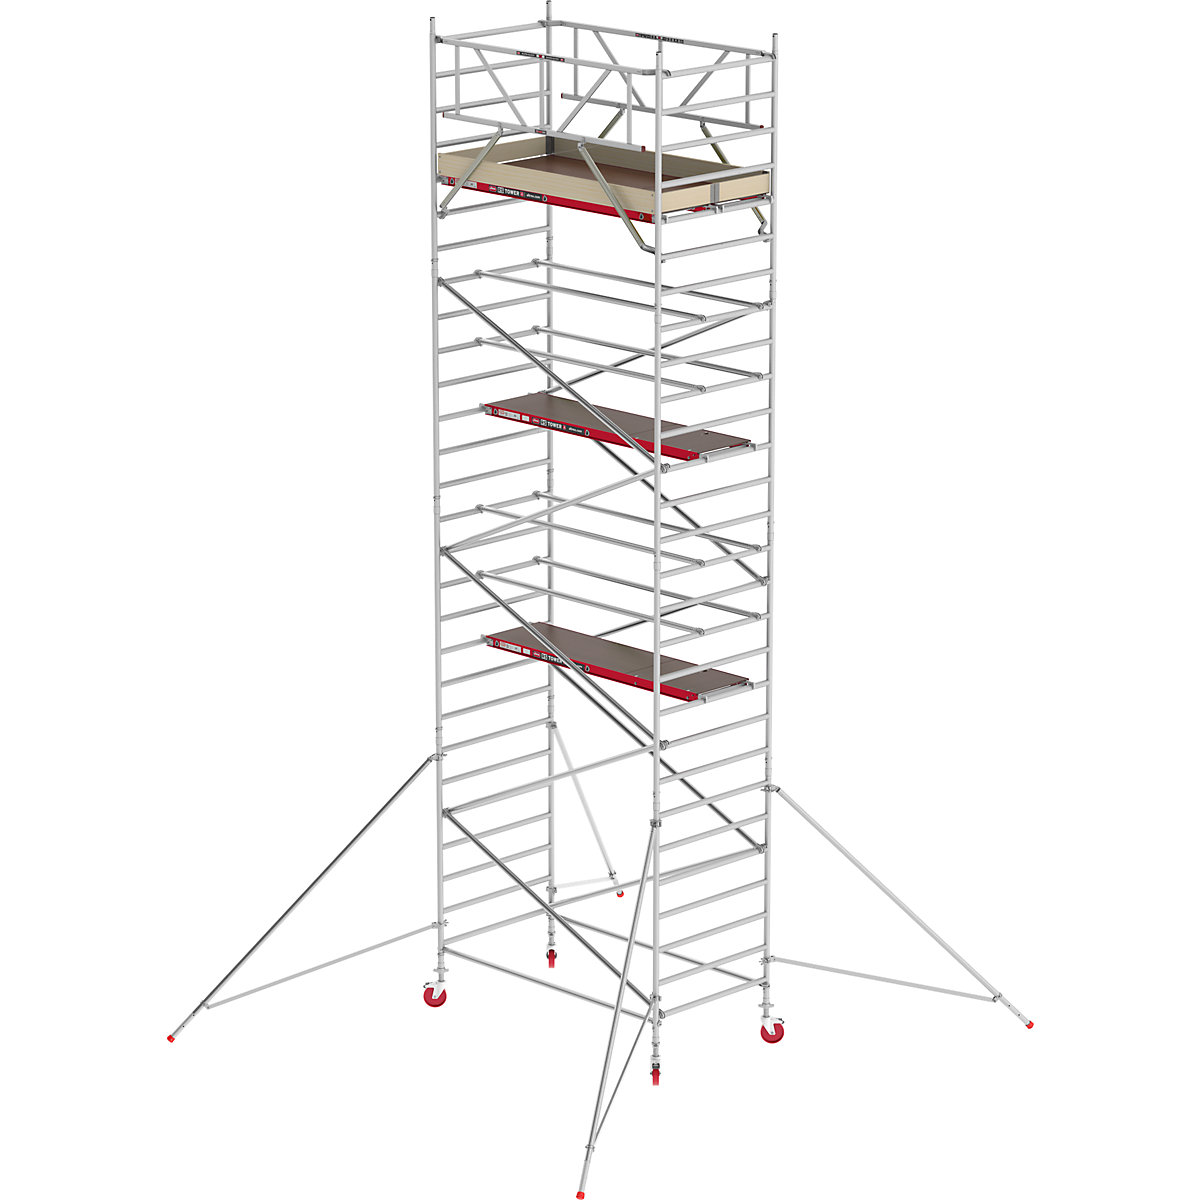 RS TOWER 42 wide mobile access tower – Altrex, wooden platform, length 1.85 m, working height 9.20 m-5